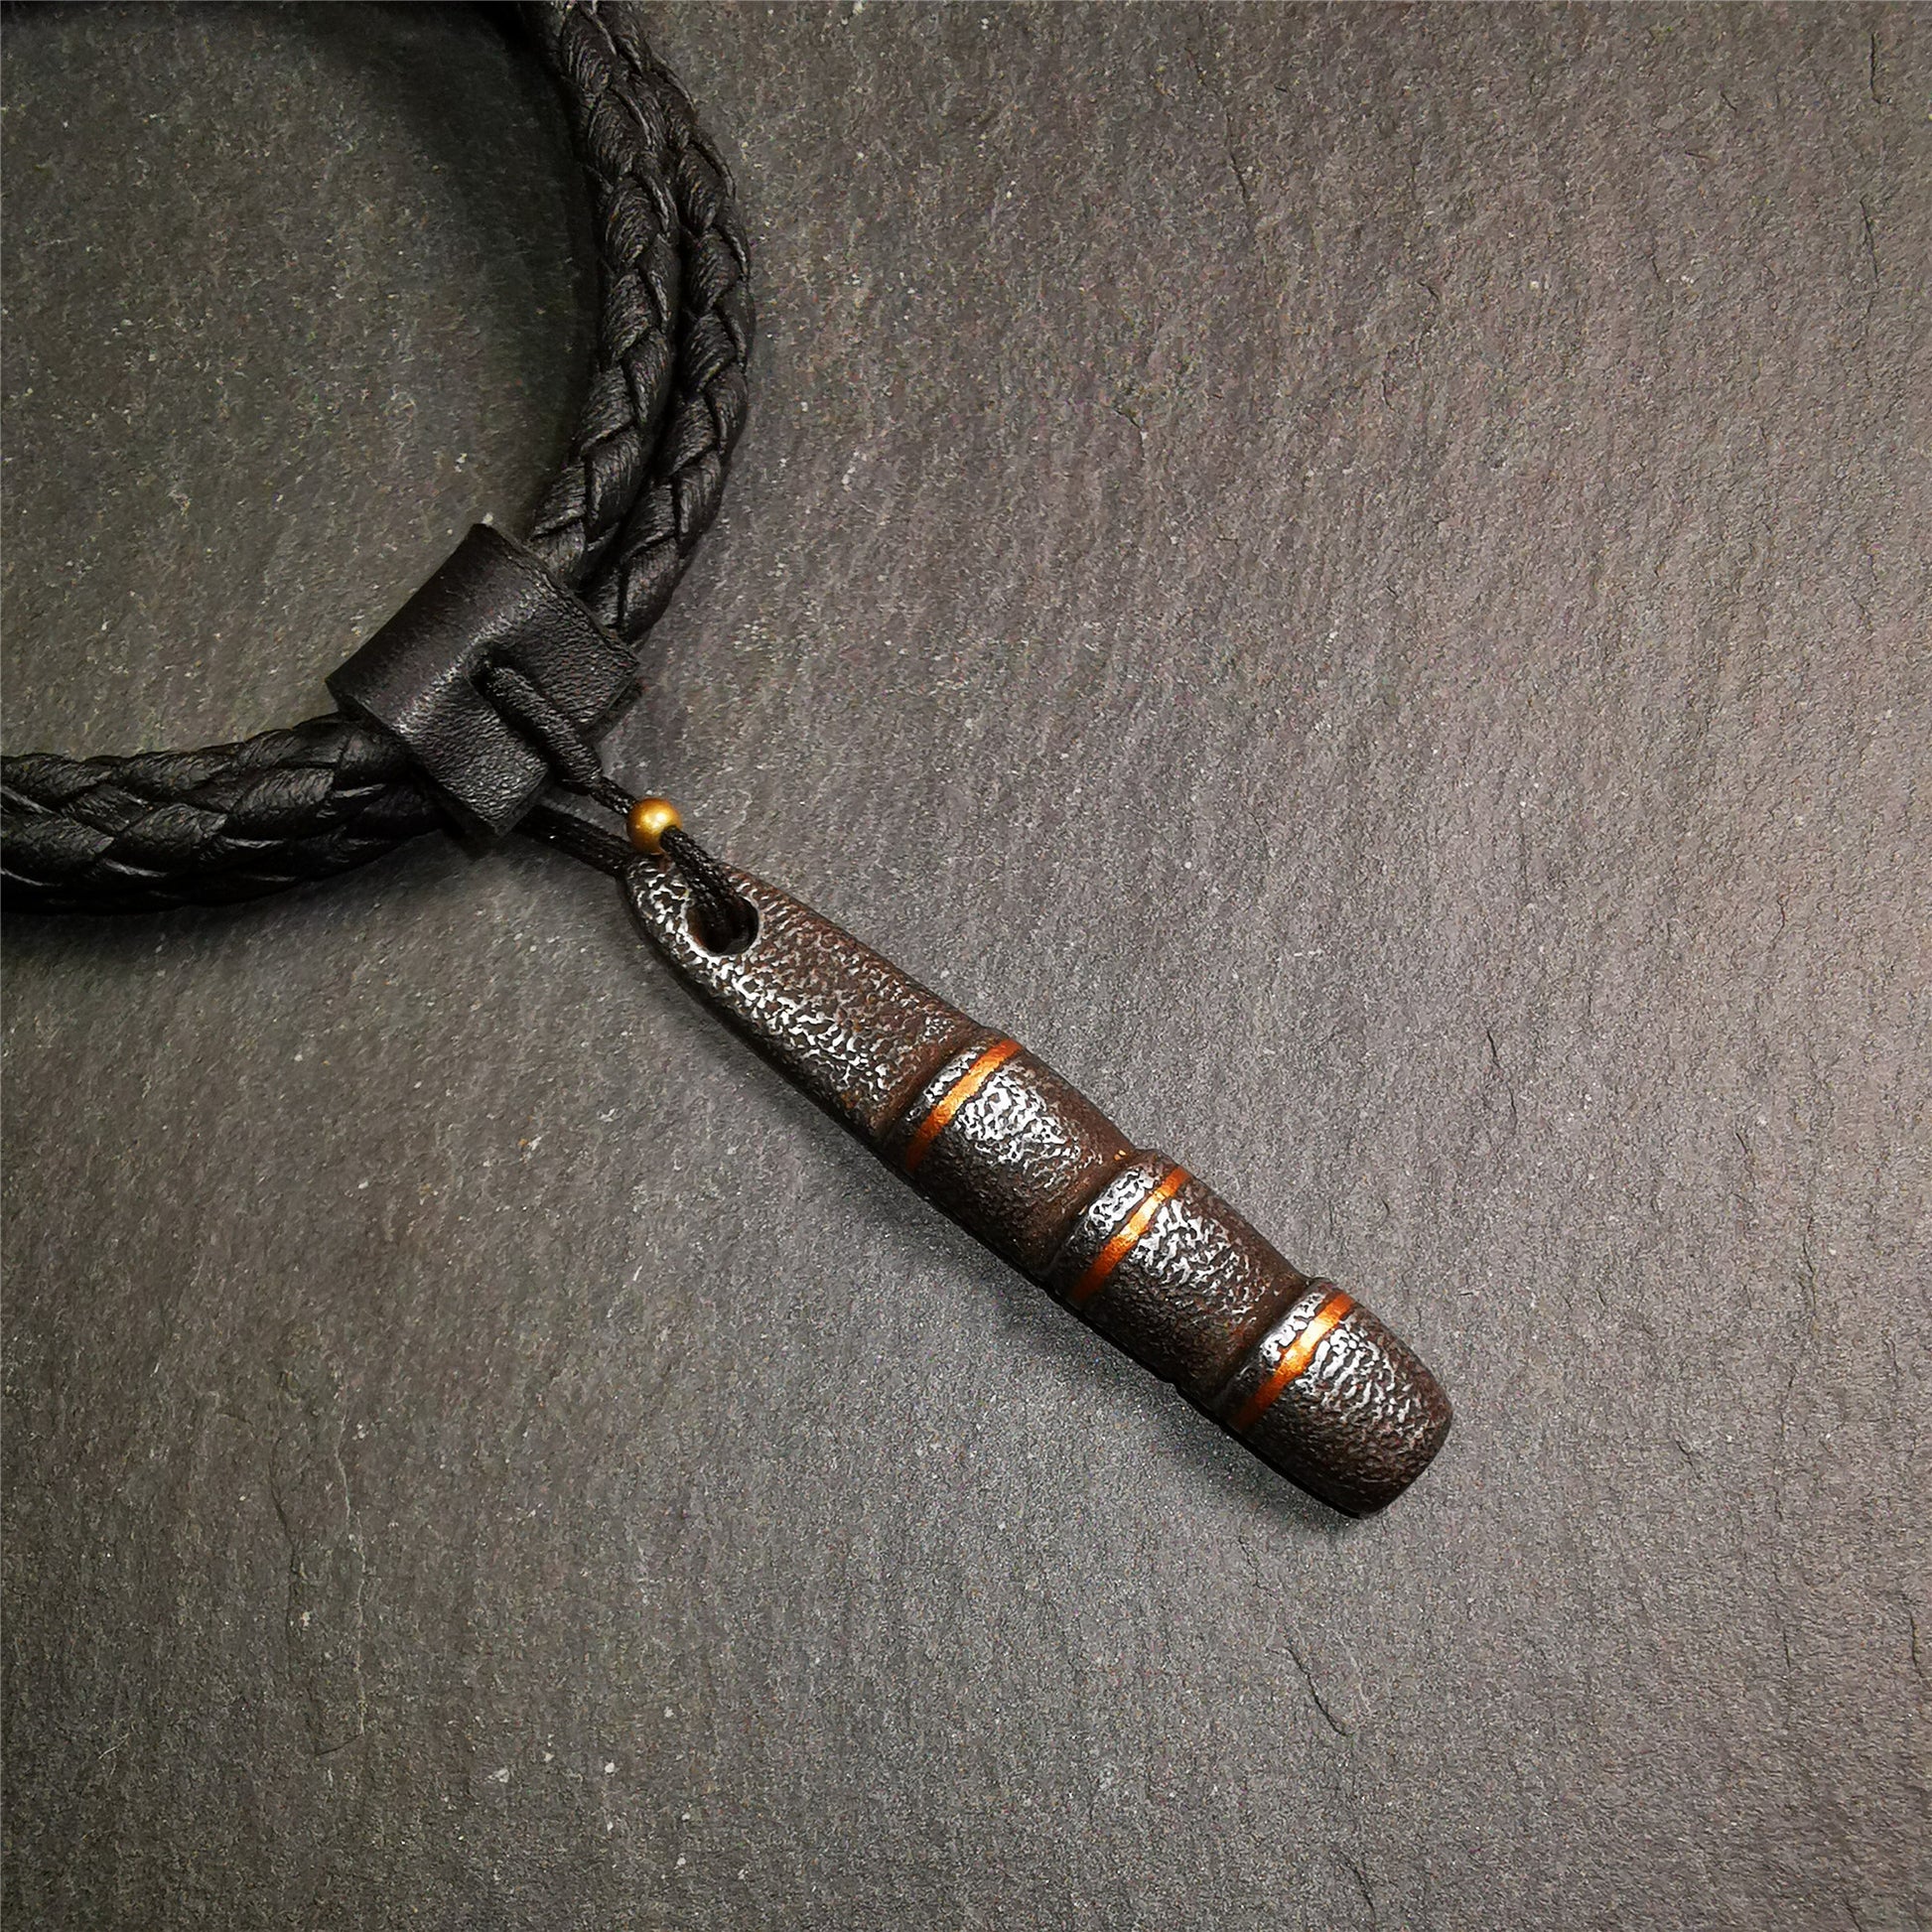 This unique Ladder pendant is made by Tibetan craftsmen. It is made of cold iron and copper, black color,the shape is Tibetan Ladder of Heaven,length is 53mm. You can make it into a pendant,keychain, or just put it on your desk,as an ornament.